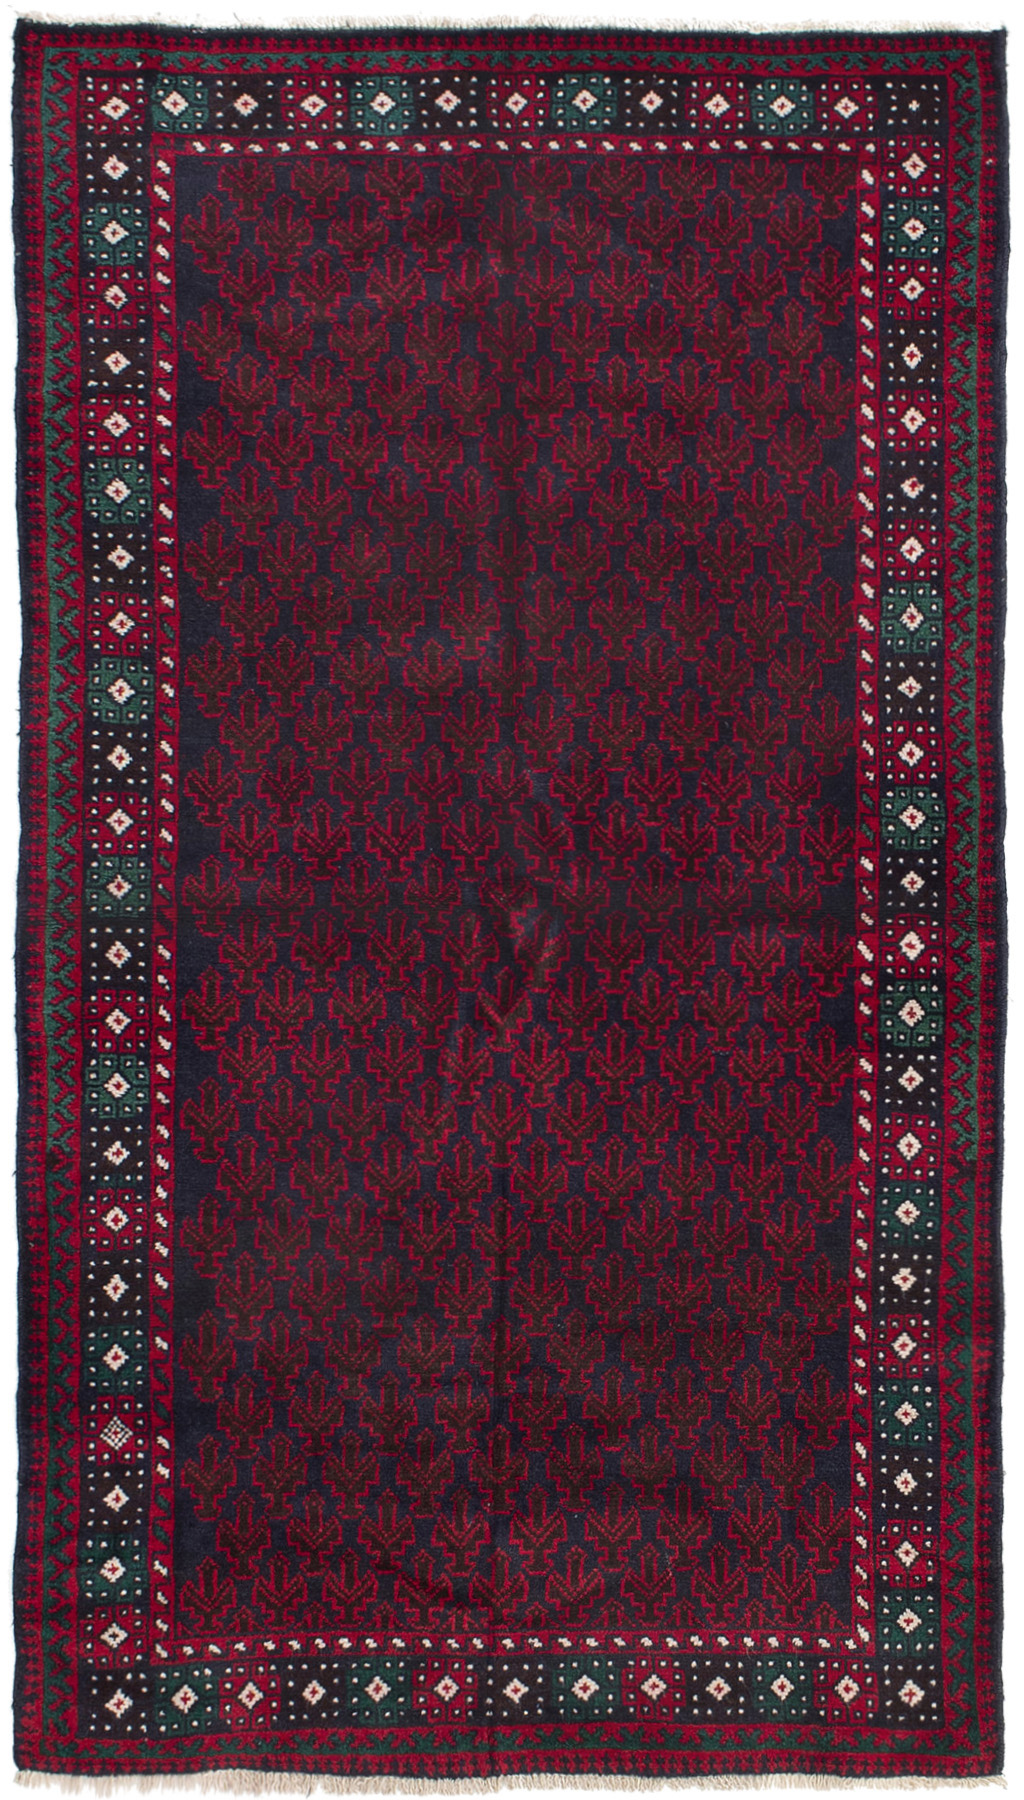 Hand-knotted Rizbaft Red Wool Rug 3'5" x 6'2"  Size: 3'5" x 6'2"  